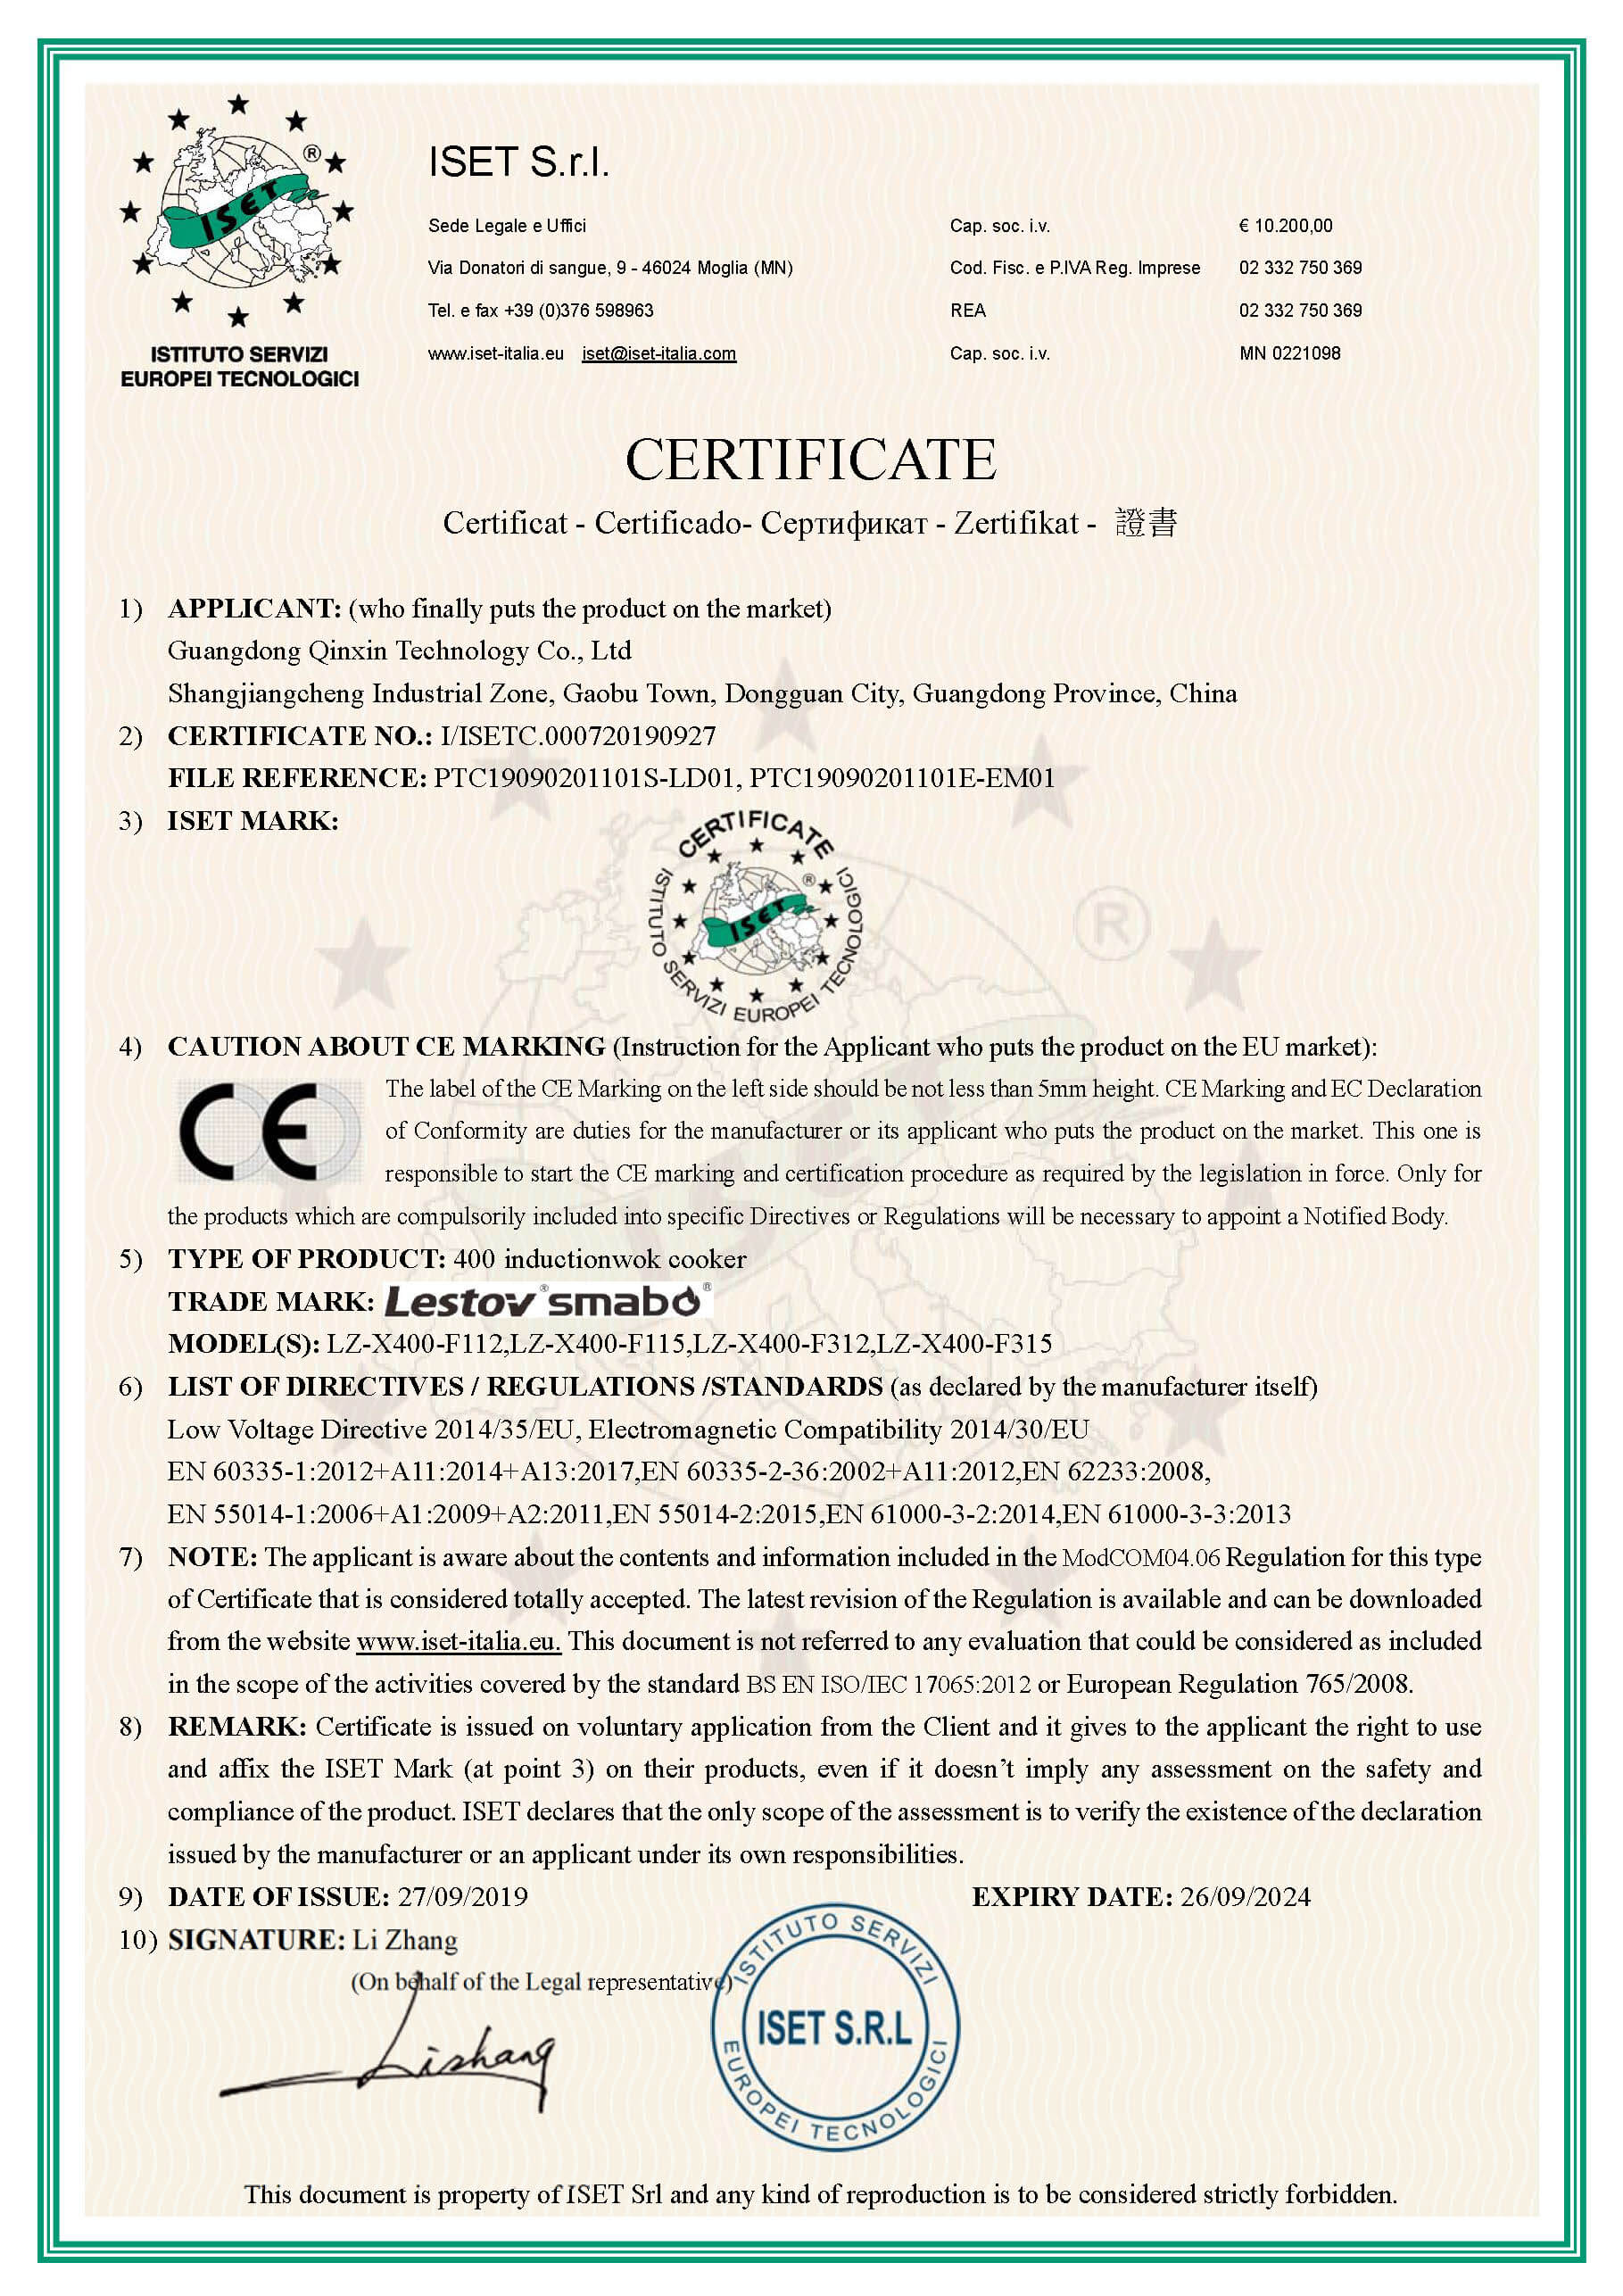 CE certificate from Lestov commercial induction cooker manufacturer